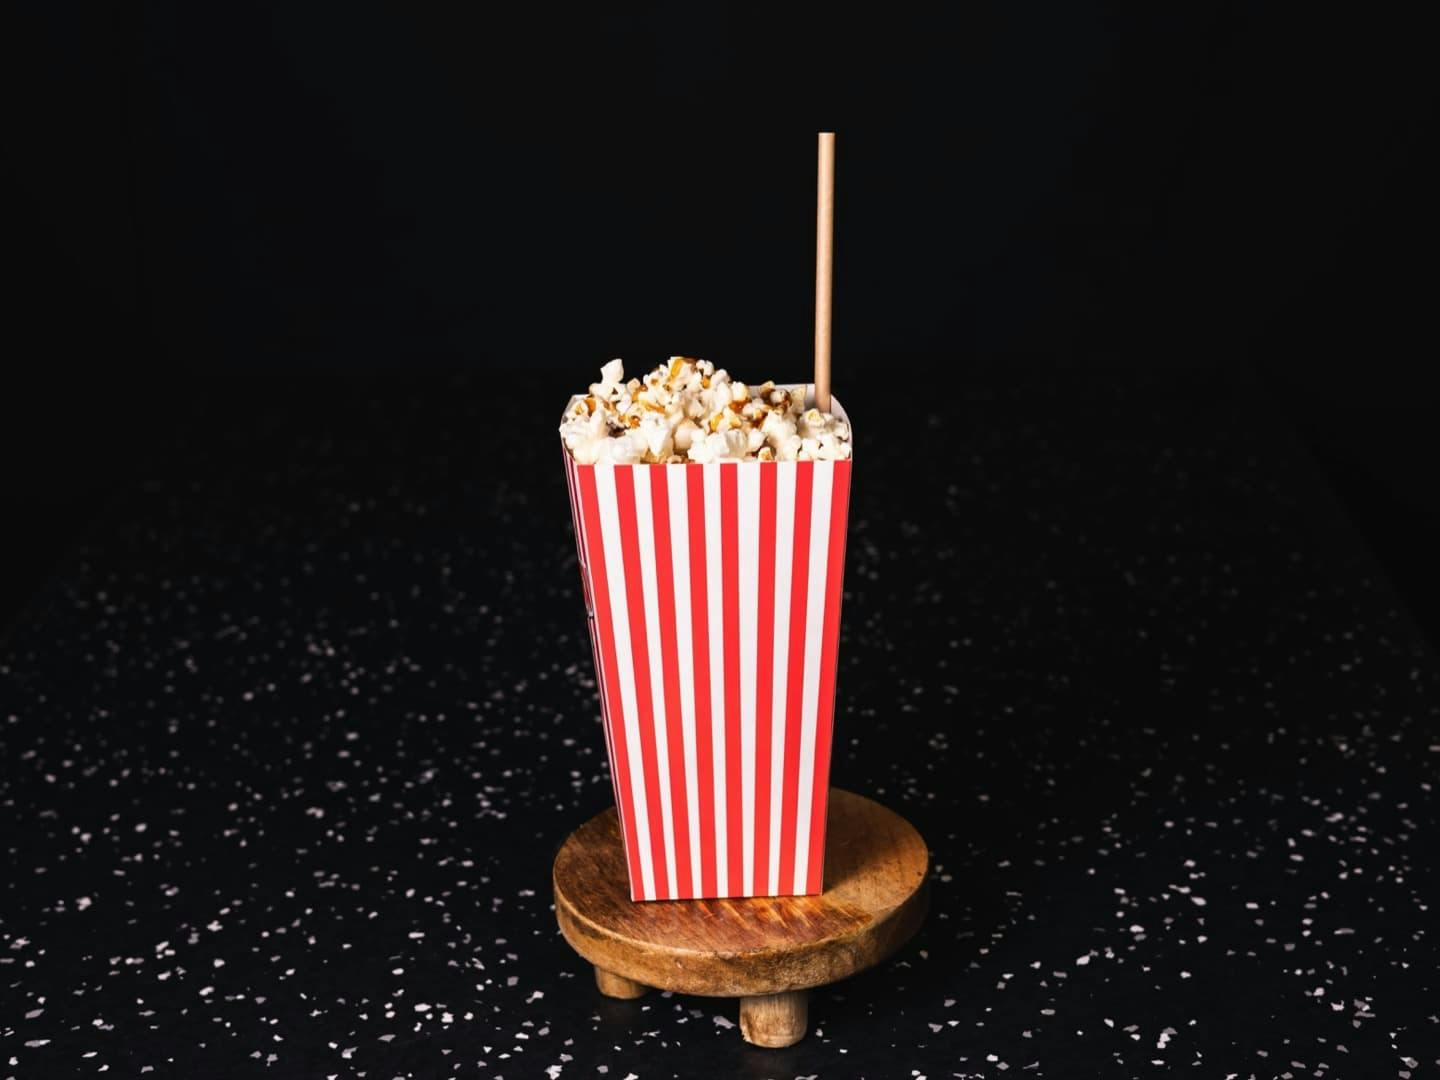 <p>What's hidden in the popcorn box?</p>
<p>Base: Vodka, popcorn , salted butter caramel</p>